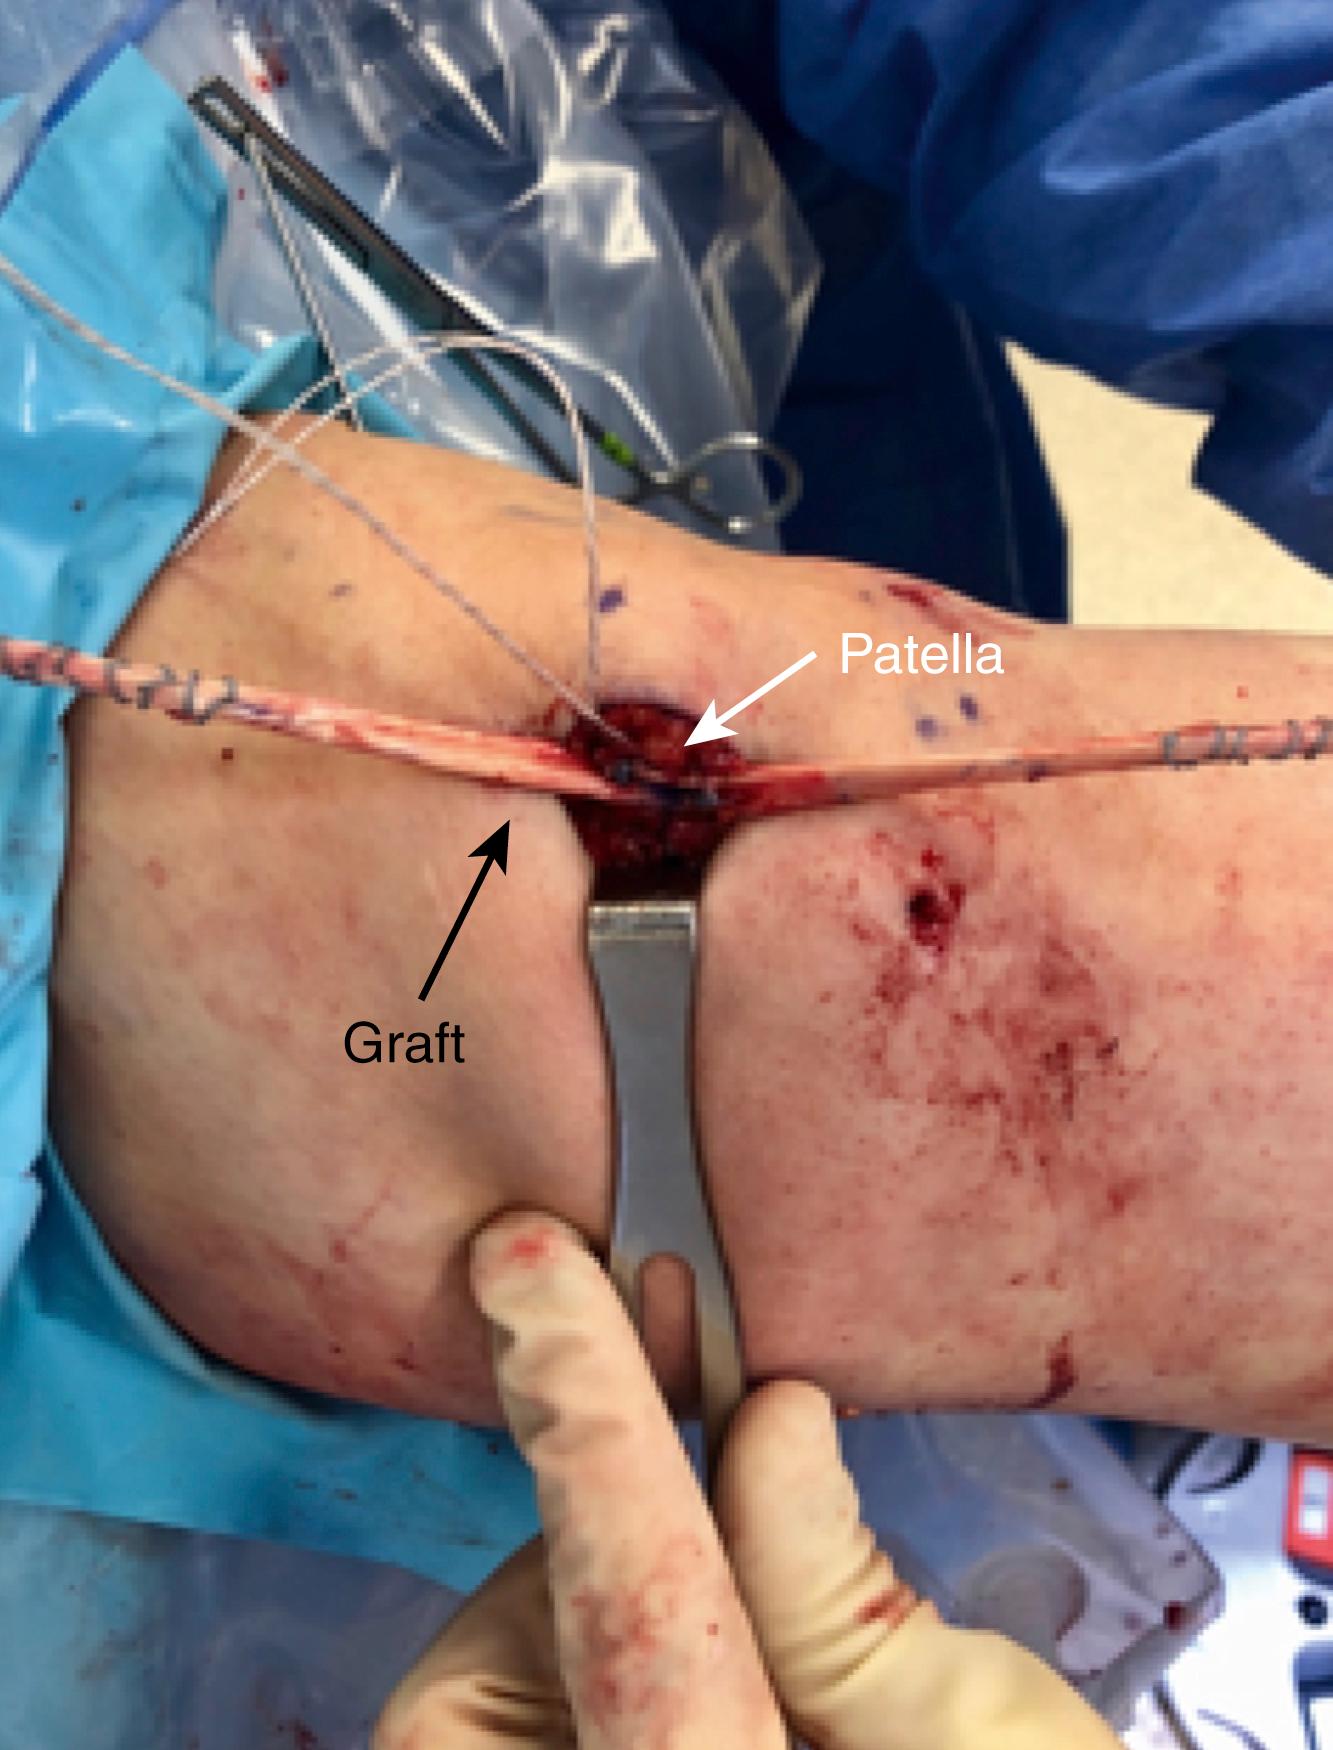 Fig. 30.11, Fixation of the medial patellofemoral ligament (MPFL) graft to the patella.